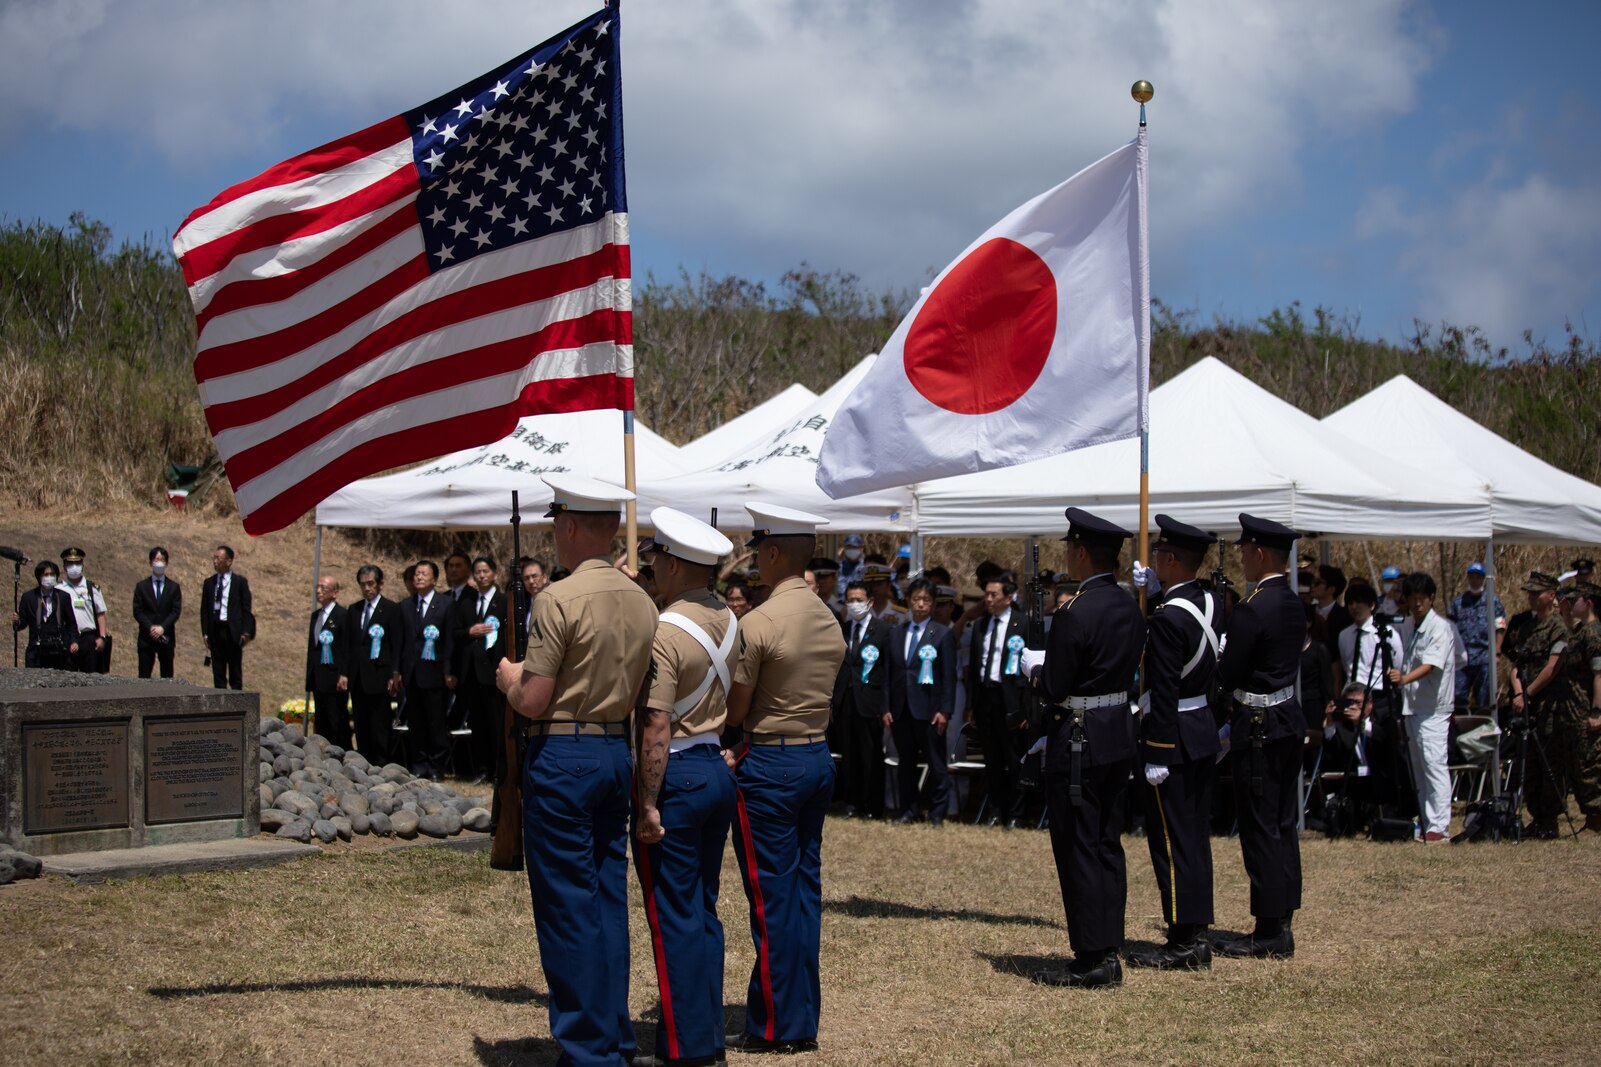 The Reunion of Honor ceremony is held annually to bring together leaders from the U.S. and Japan, veterans, distinguished guests, and their family members to pay tribute to service members lost during the Battle of Iwo Jima, and is a testament to the ironclad U.S.-Japan alliance which has blossomed over the past 78 years. (U.S. Marine Corps photo by Lance Cpl. Sebastian Riveraaponte)